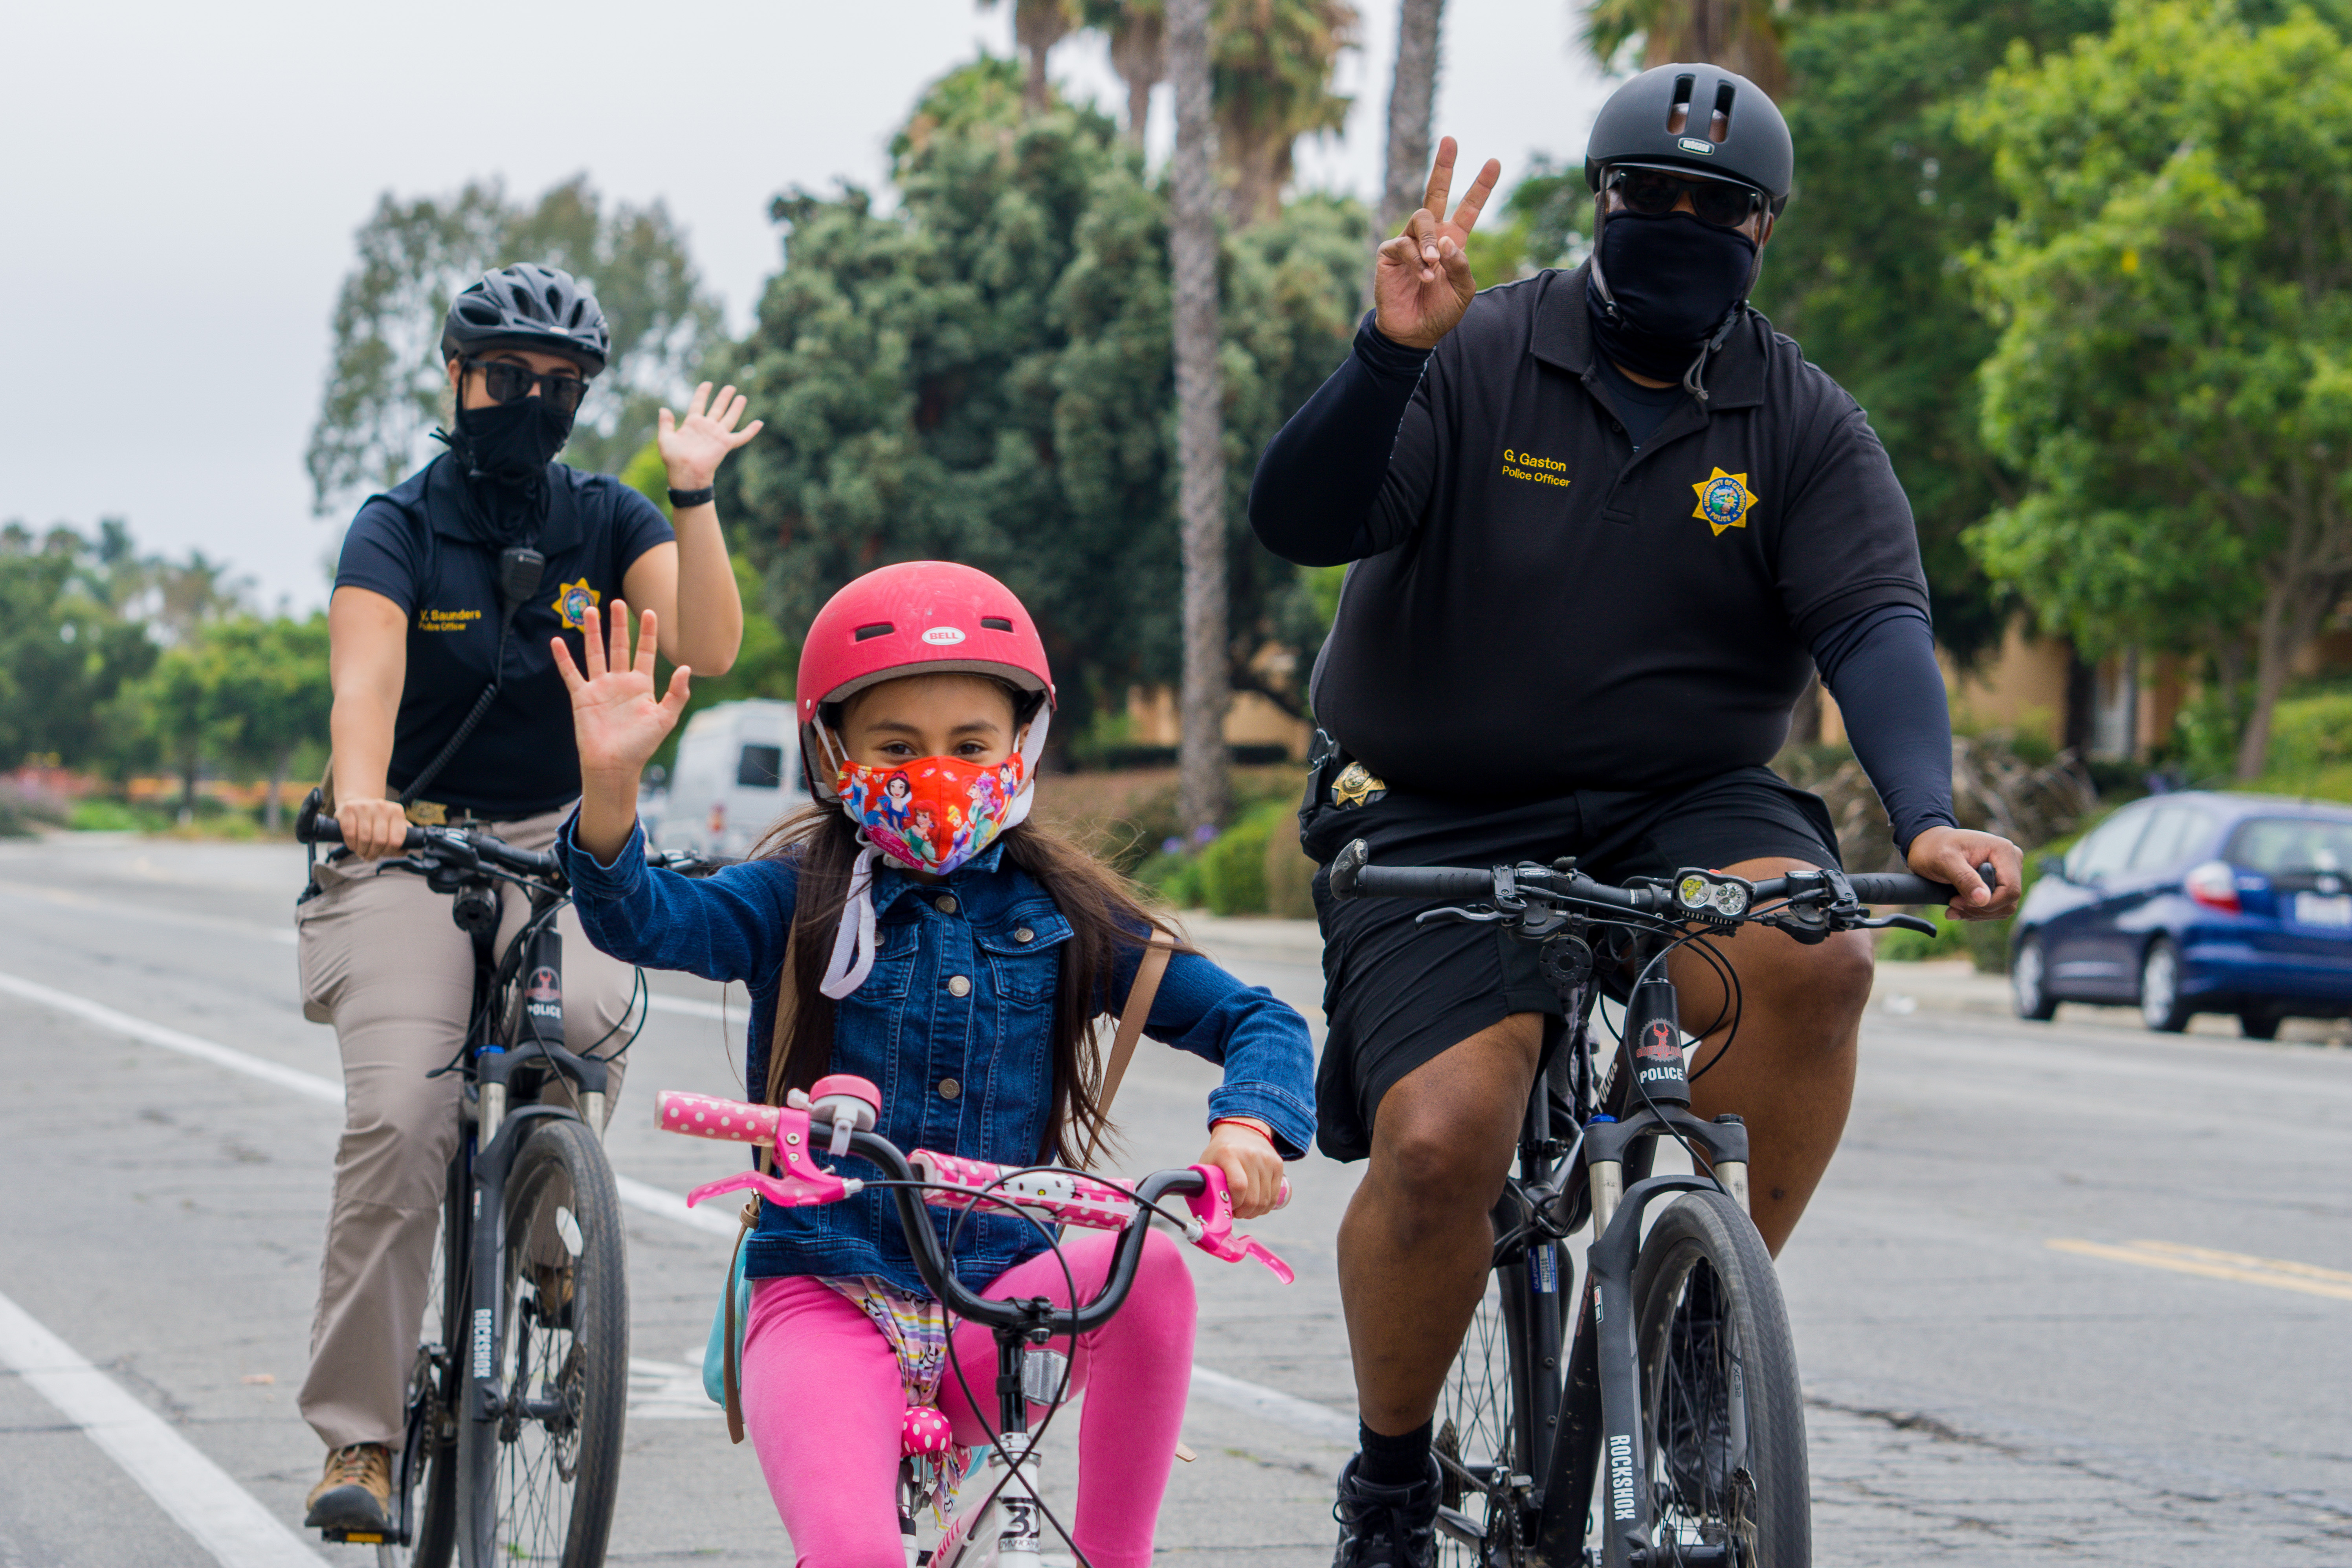 UCSB Police Officers on a socially distanced bike ride with a child